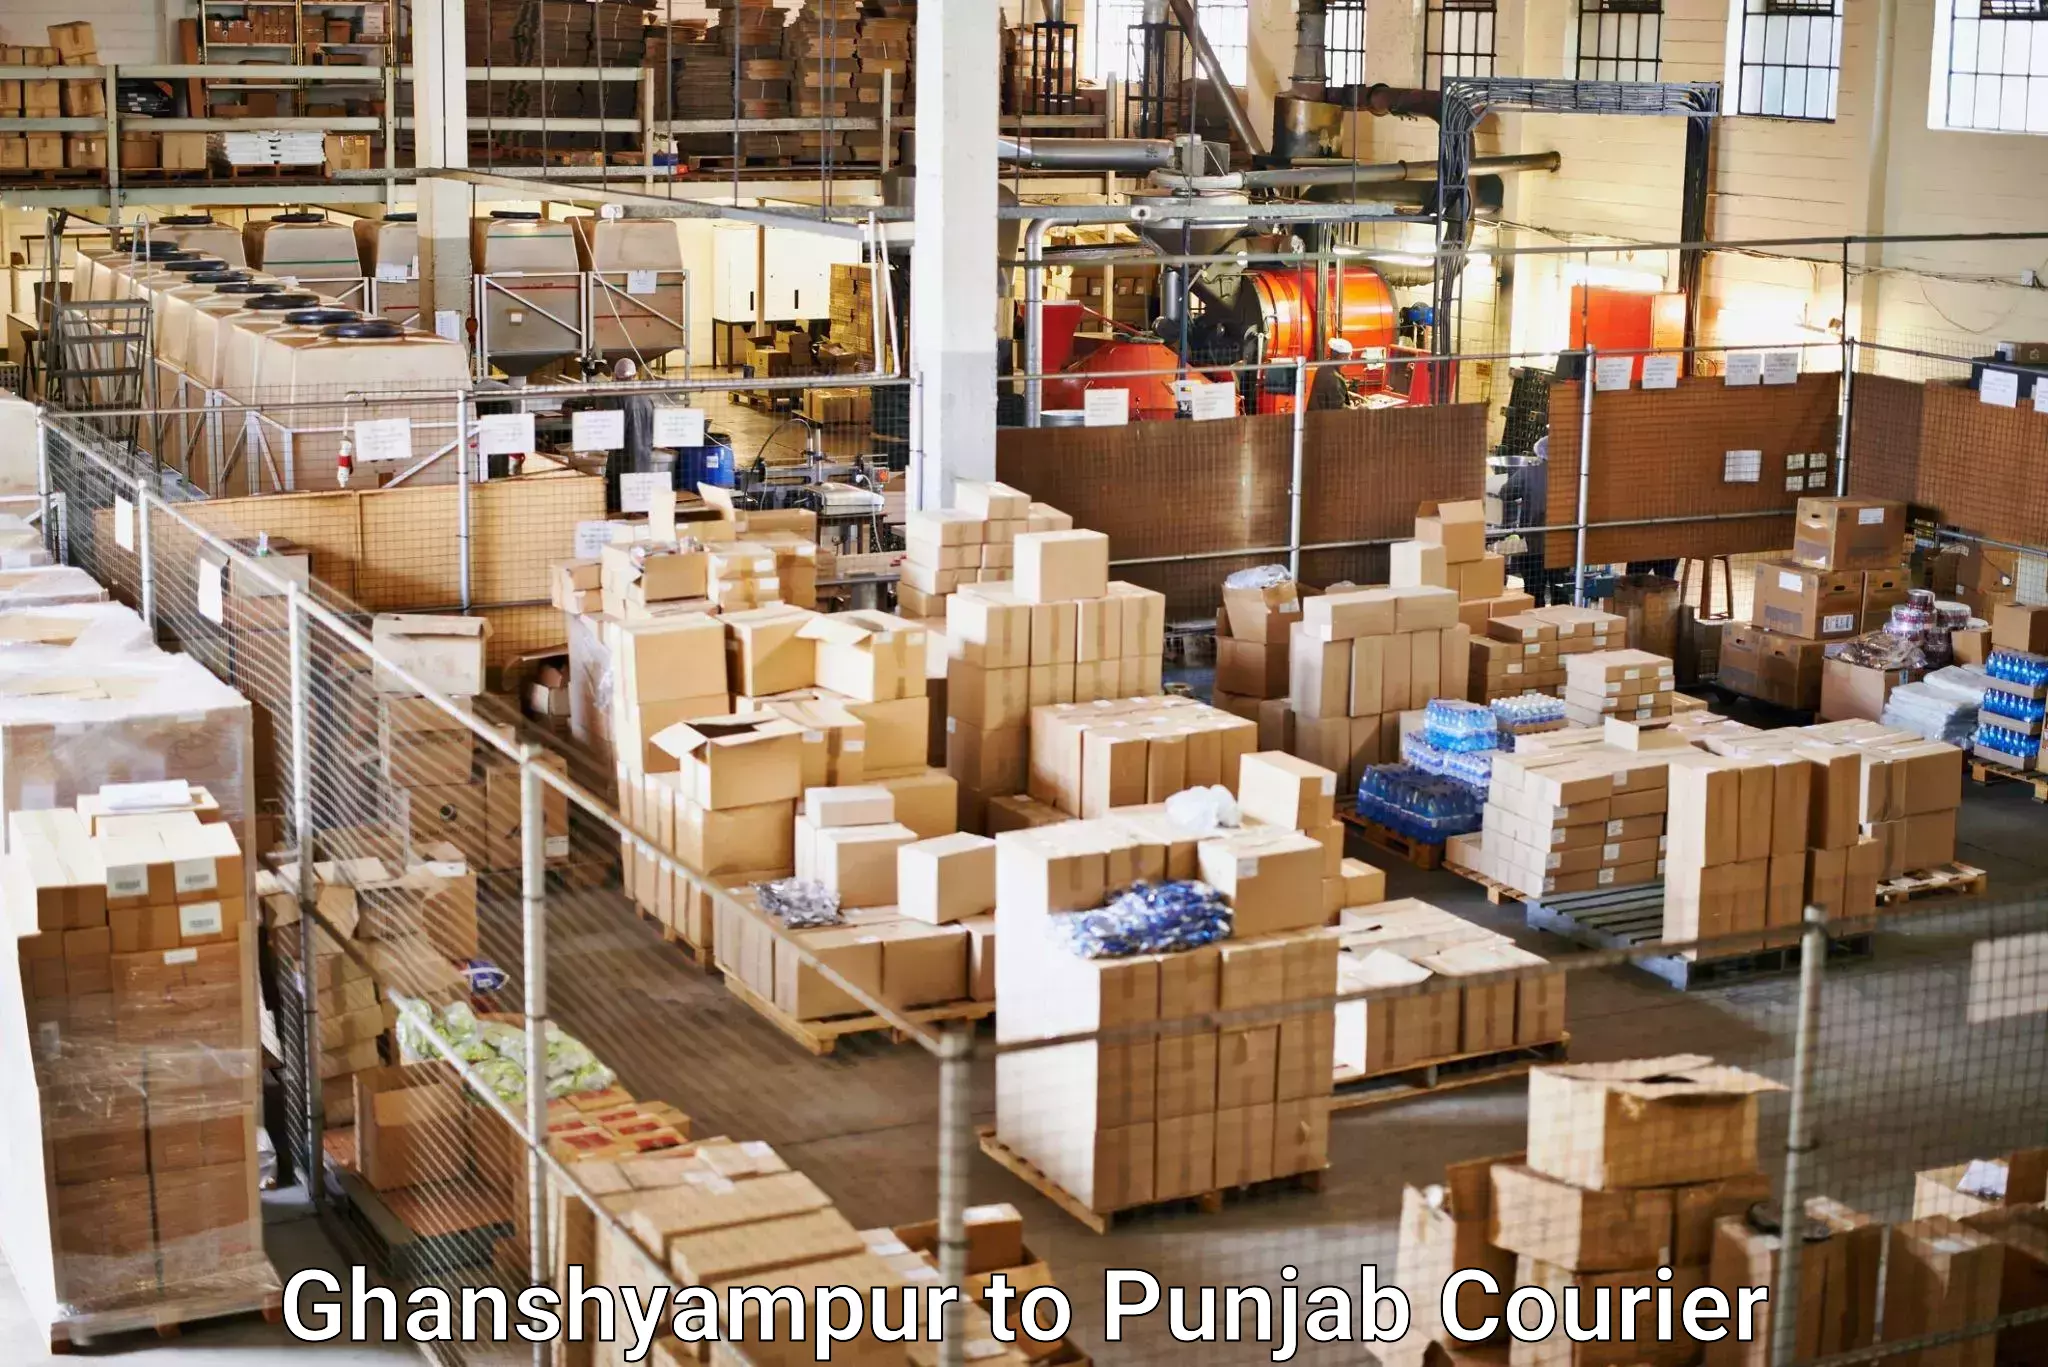 Fast-track shipping solutions Ghanshyampur to Batala